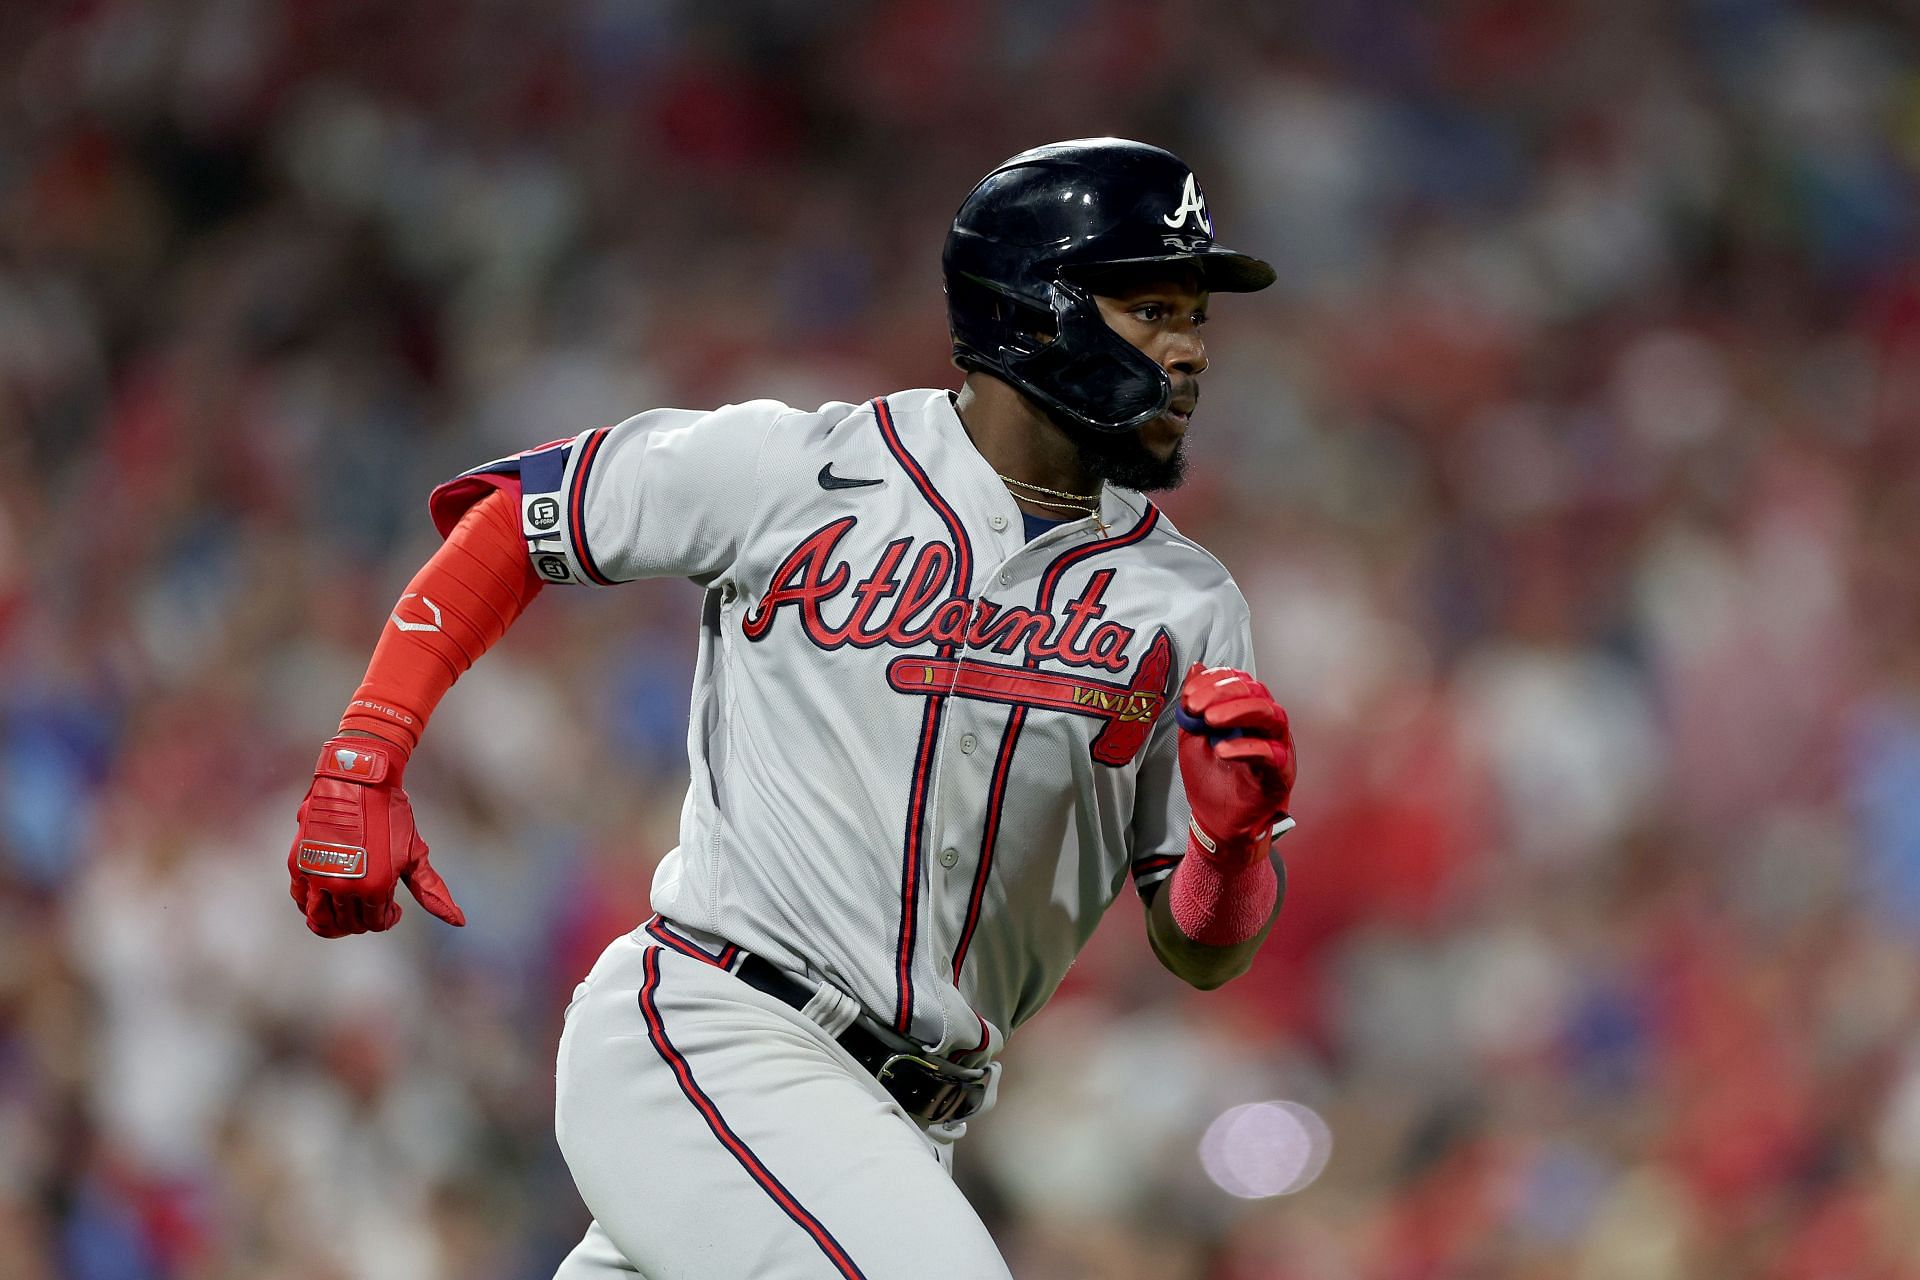 With millions here, even Michael Harris of Atlanta Braves has haters